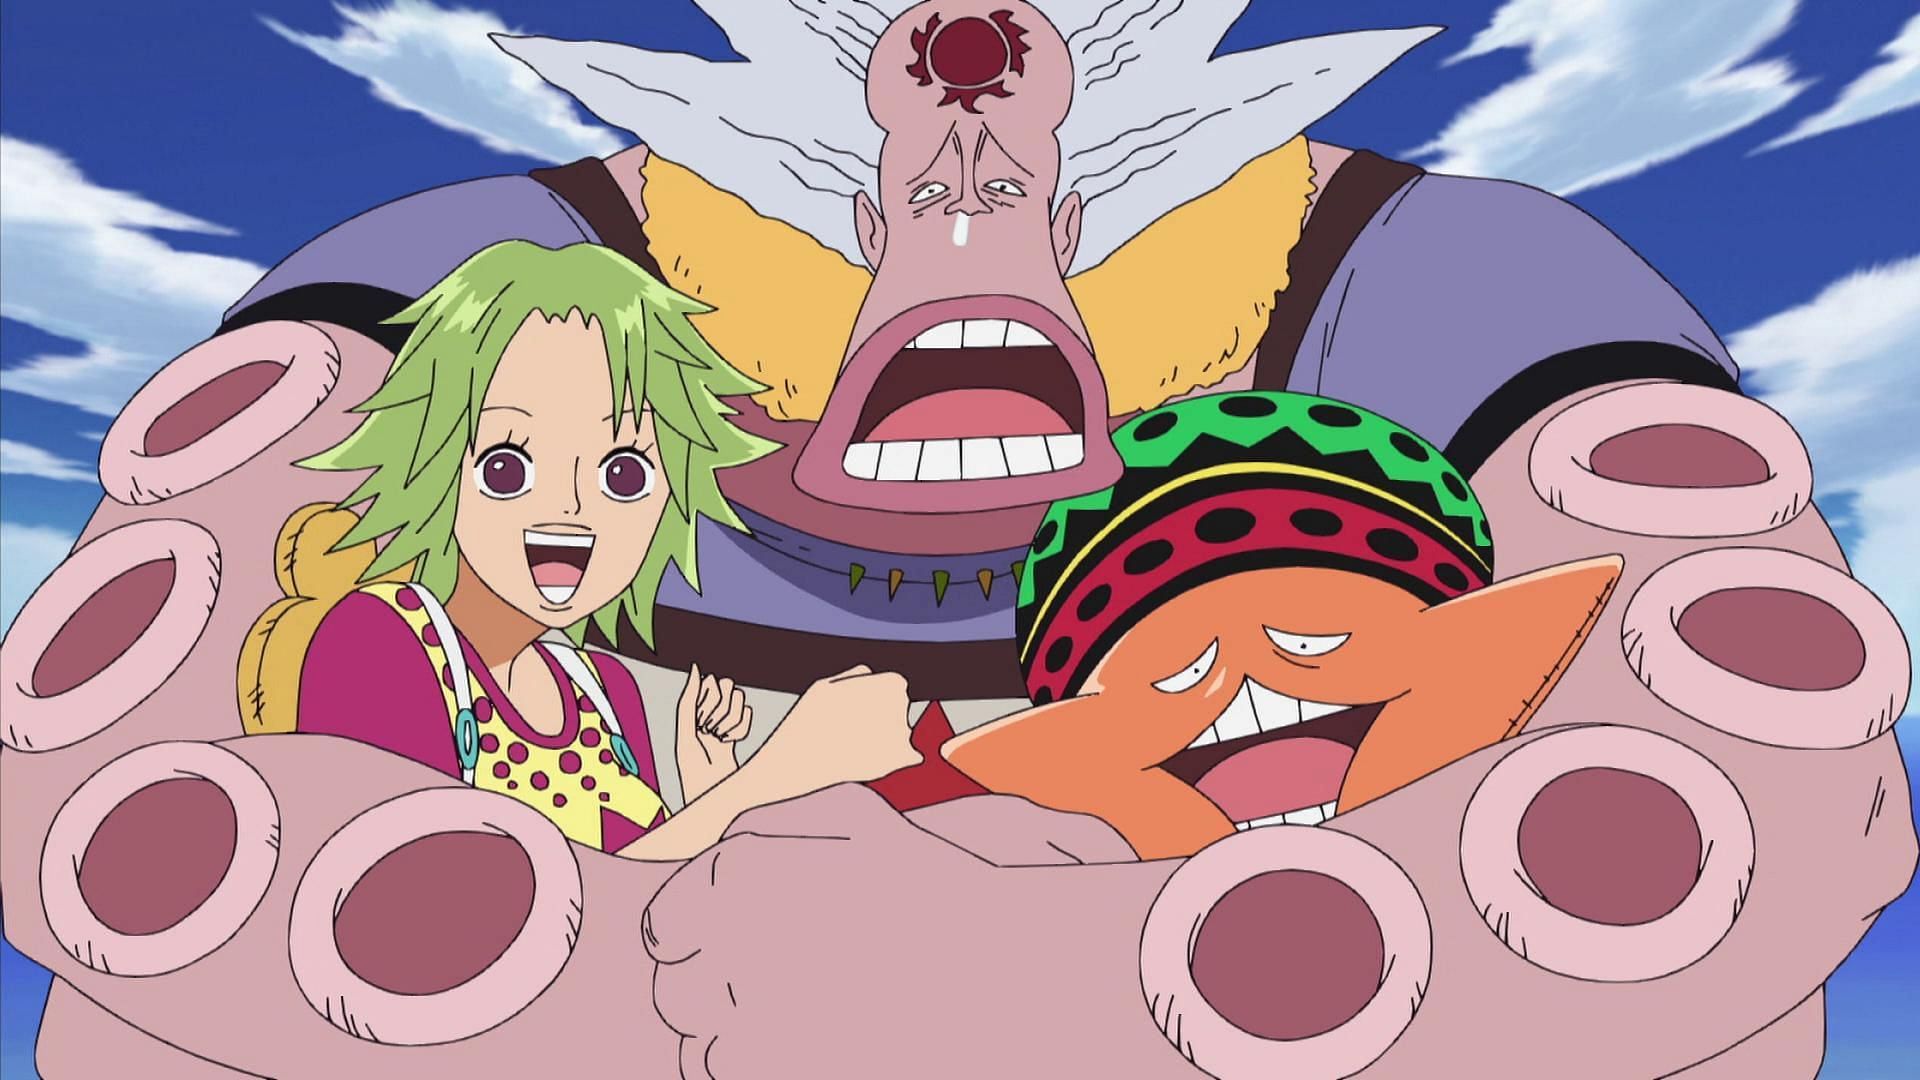 Hatchan, Camie, and Pappag as seen in One Piece (Image via Toei Animation)